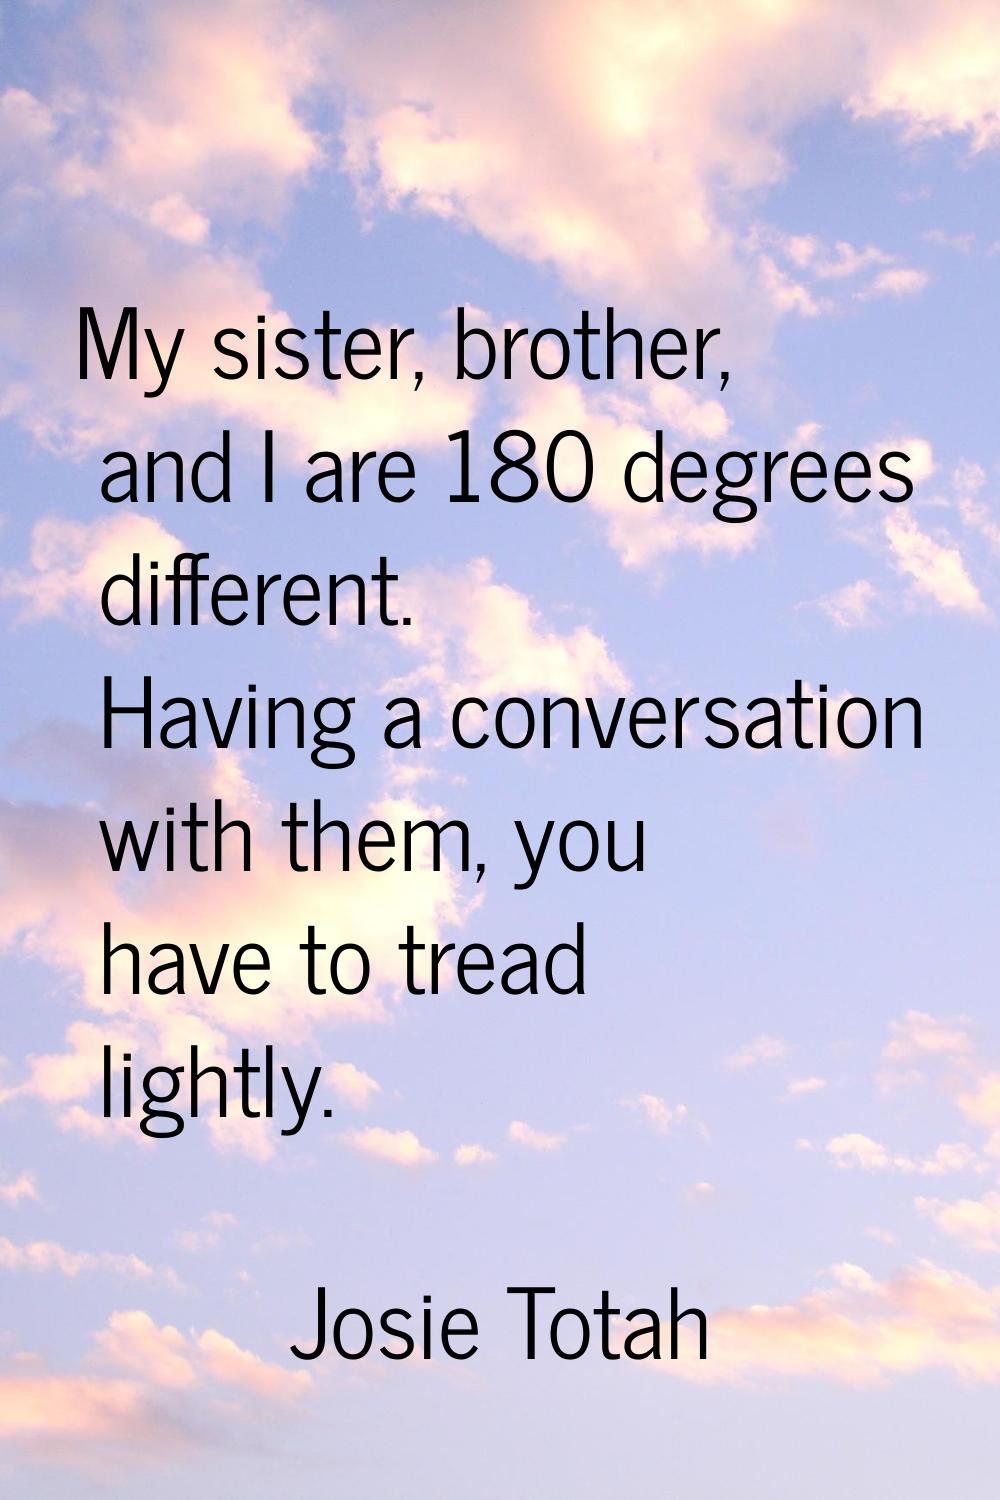 My sister, brother, and I are 180 degrees different. Having a conversation with them, you have to t